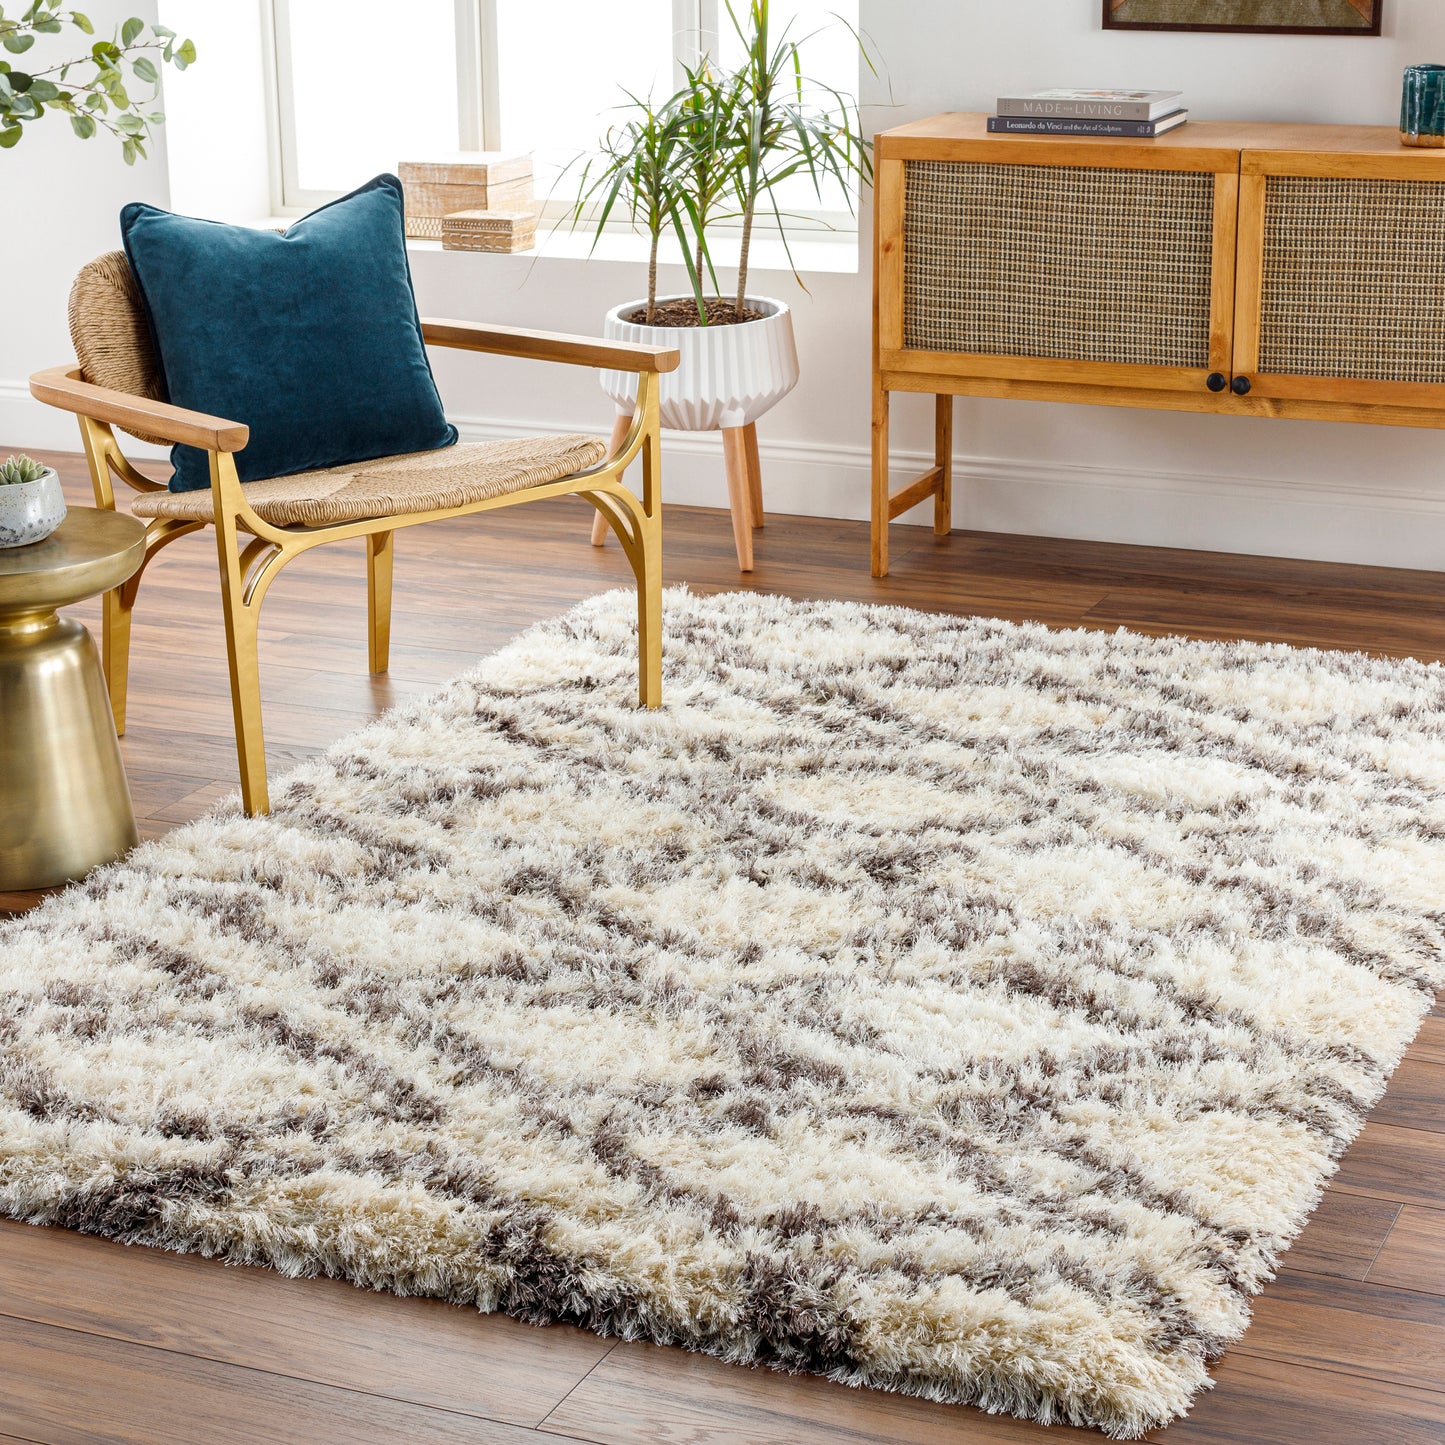 Rhapsody 16227 Machine Woven Synthetic Blend Indoor Area Rug by Surya Rugs